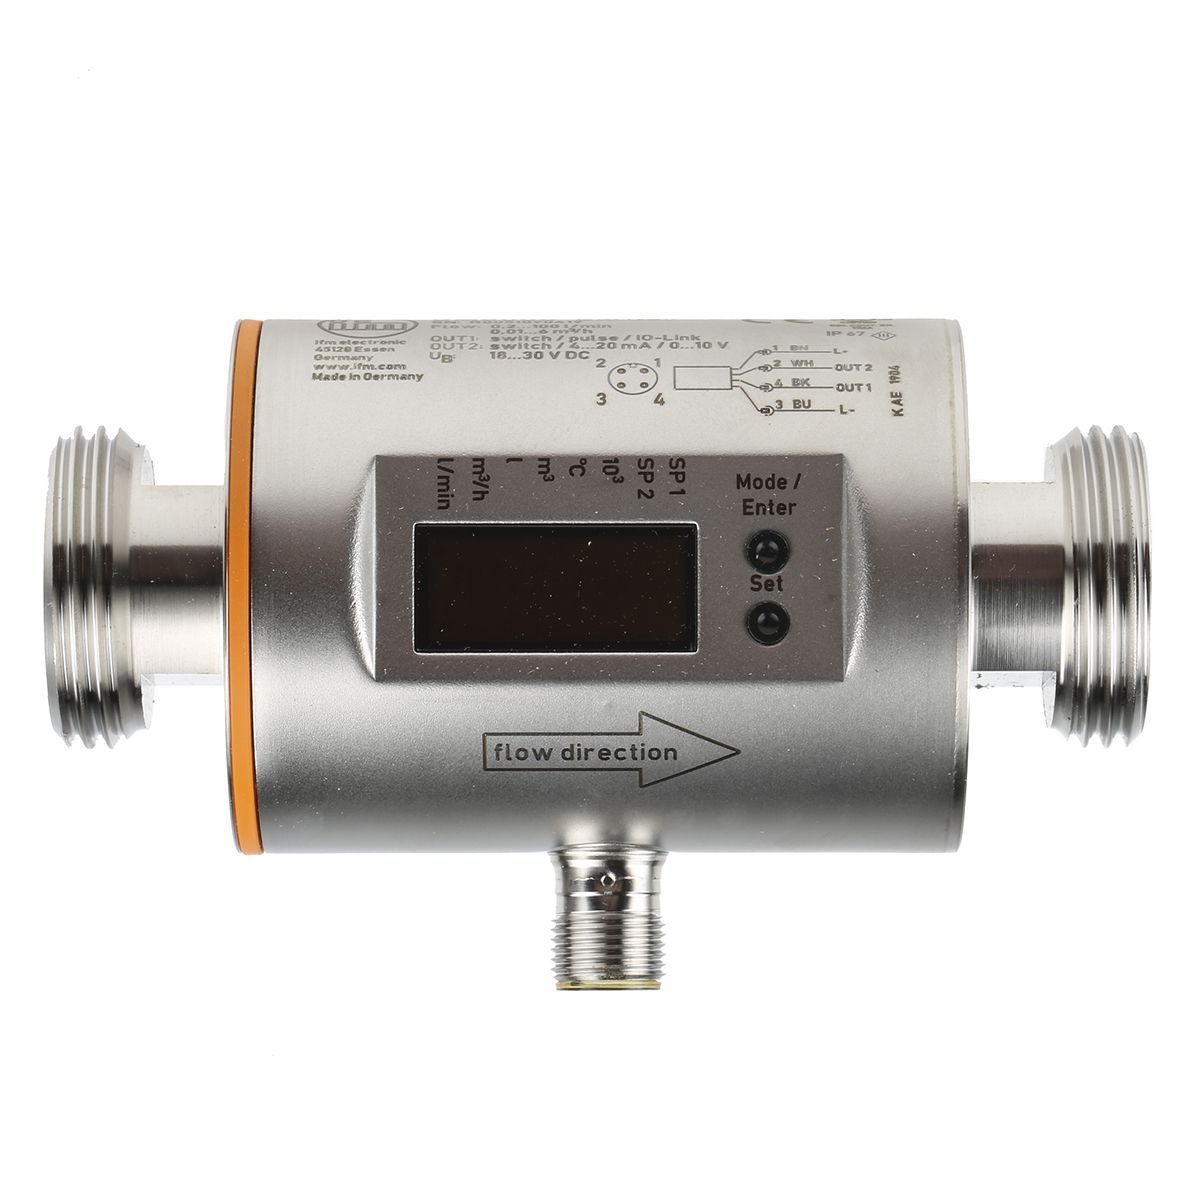 ifm electronic SM Series Magnetic-Inductive Flow Meter for Liquid, 0.2 L/min Min, 100 L/min Max